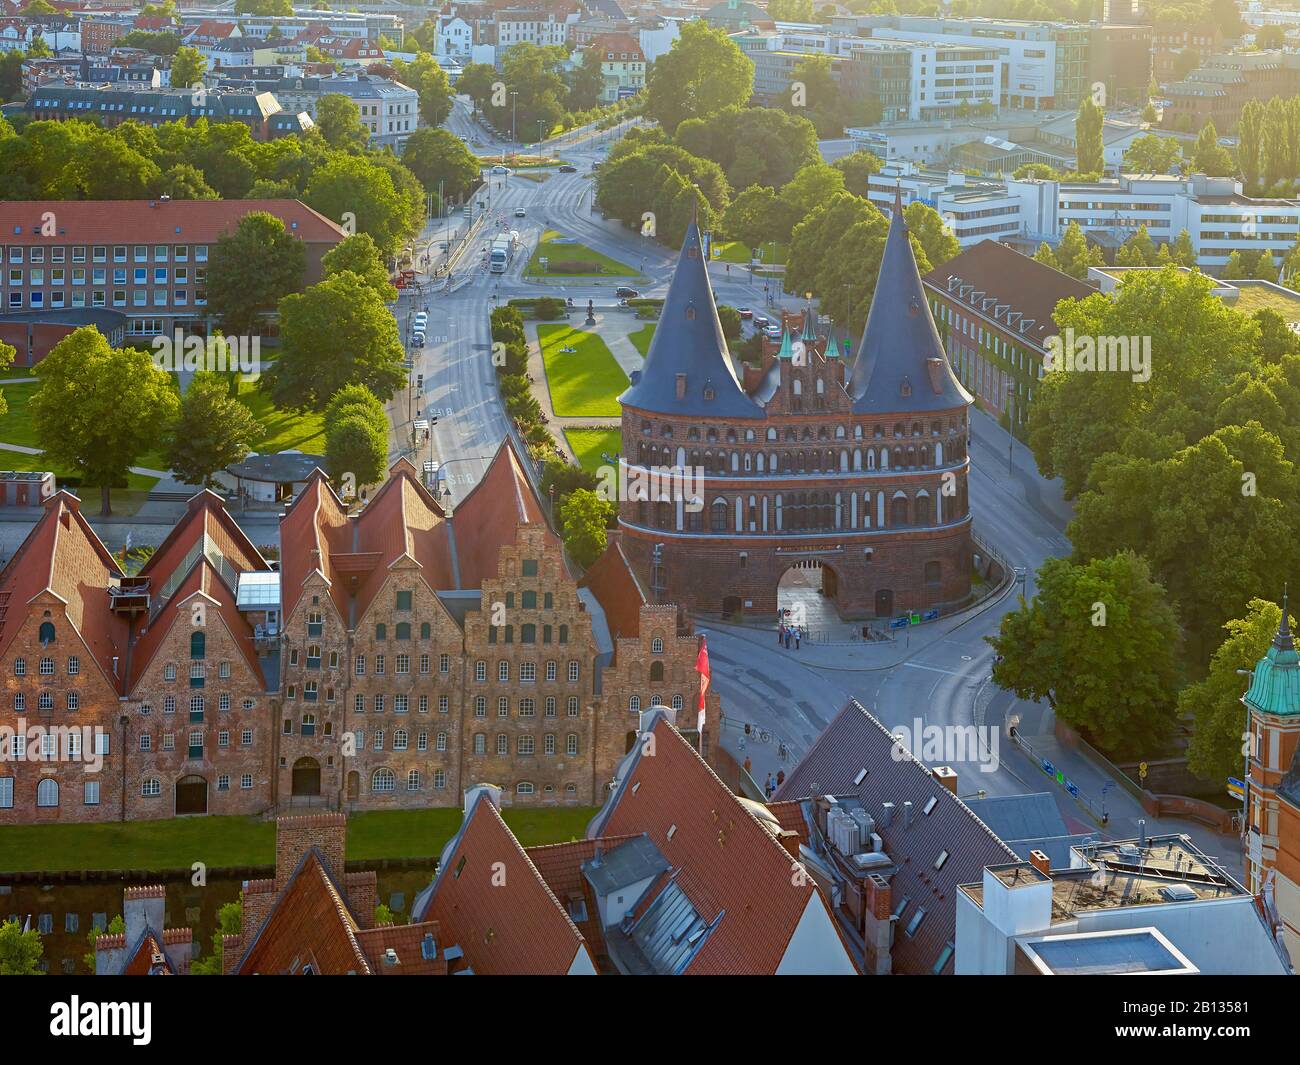 Warehouses and Holsten Gate,Hanseatic city of Lubeck,Schleswig-Holstein,Germany Stock Photo